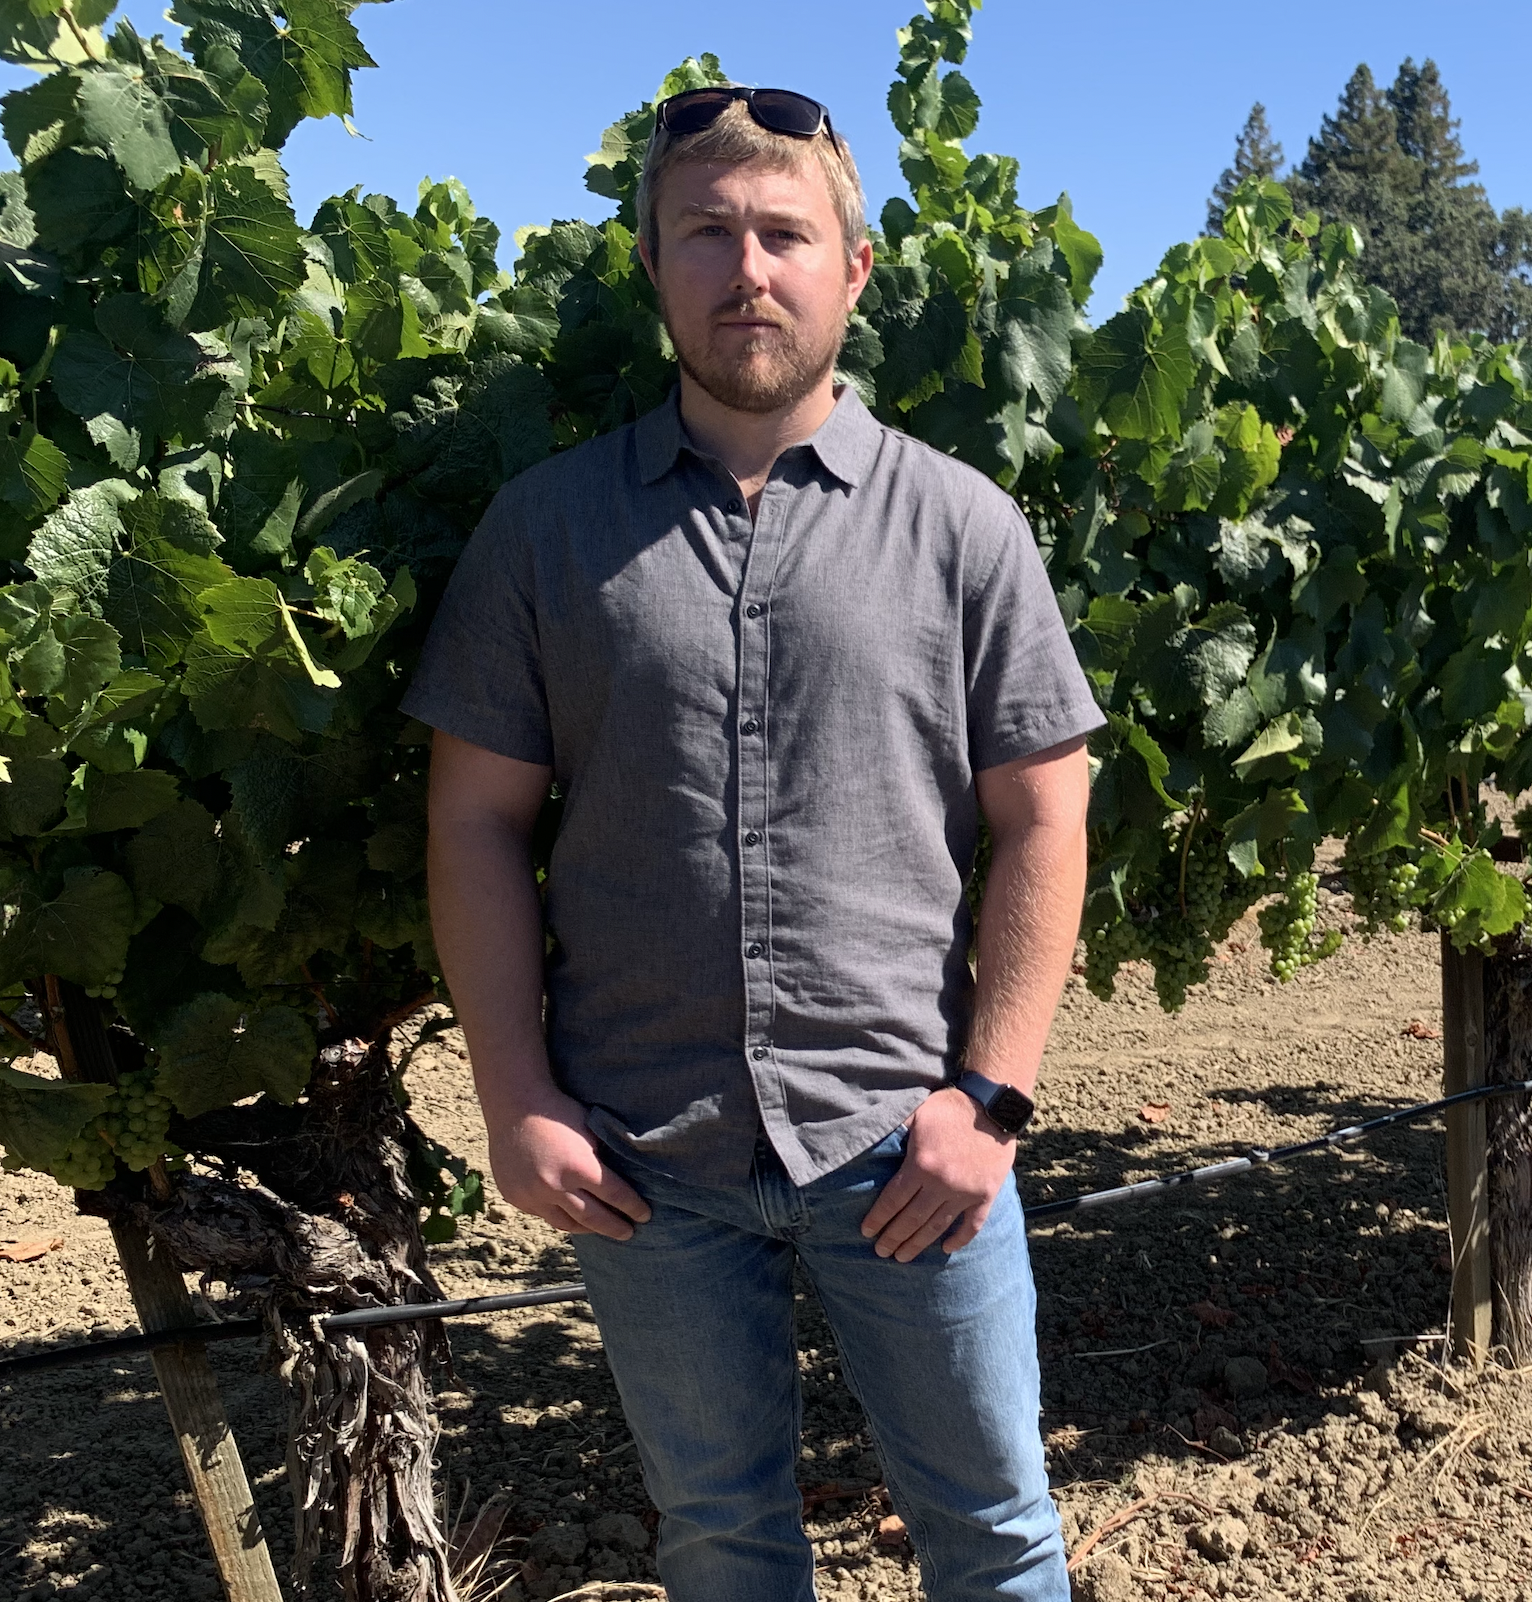 2022 Napa Valley vintage update with Mike Tracy of Trois Noix